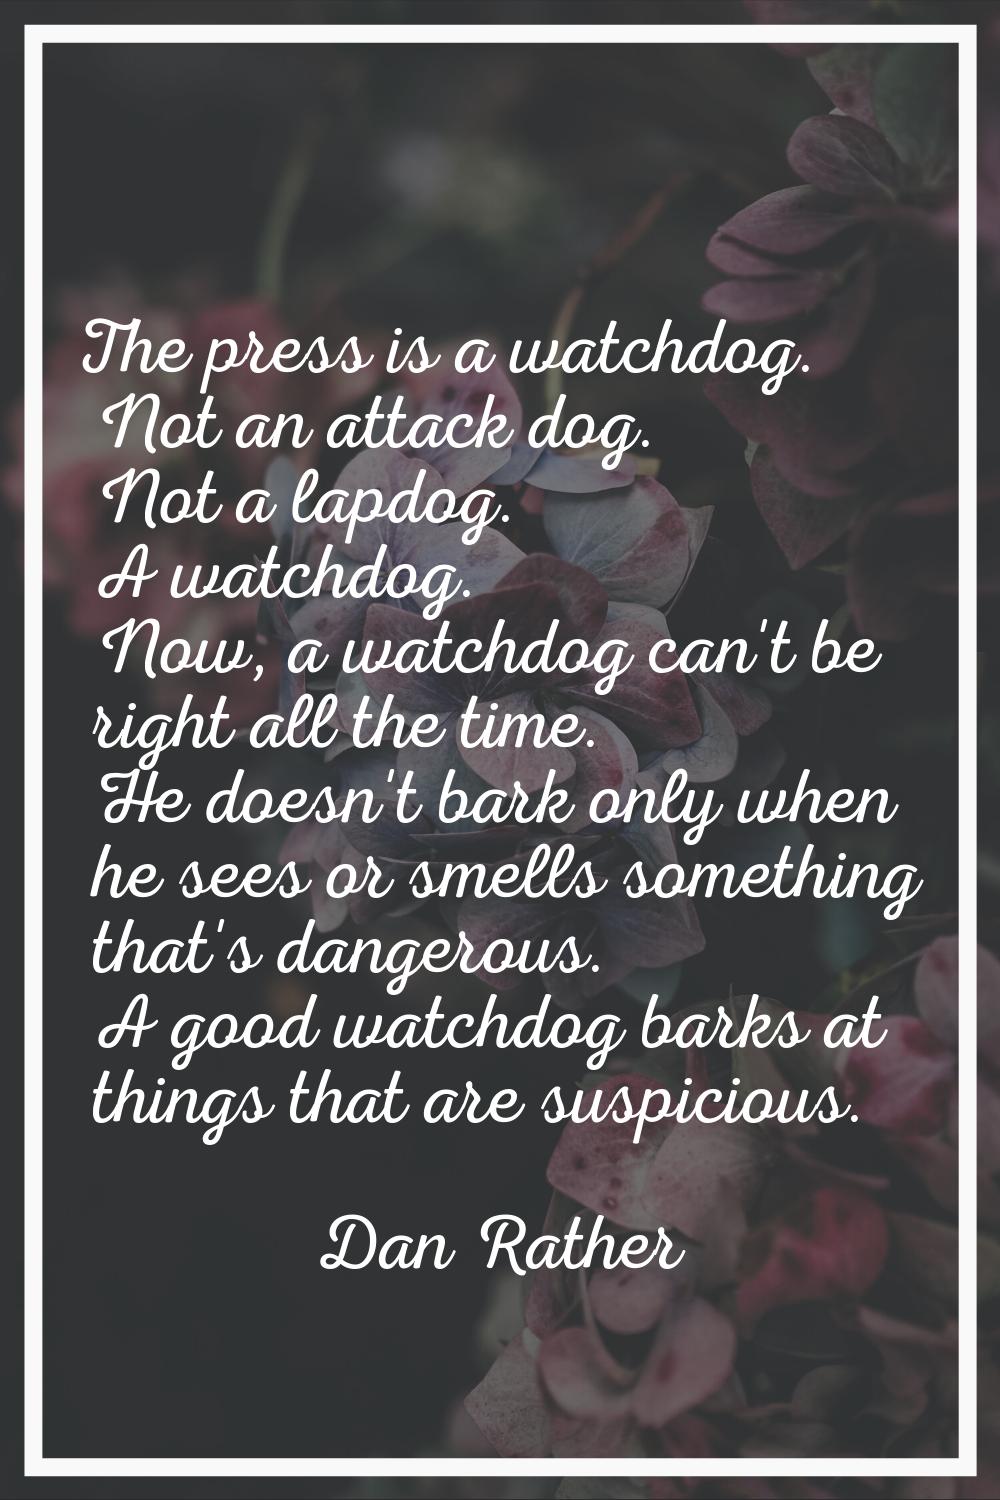 The press is a watchdog. Not an attack dog. Not a lapdog. A watchdog. Now, a watchdog can't be righ